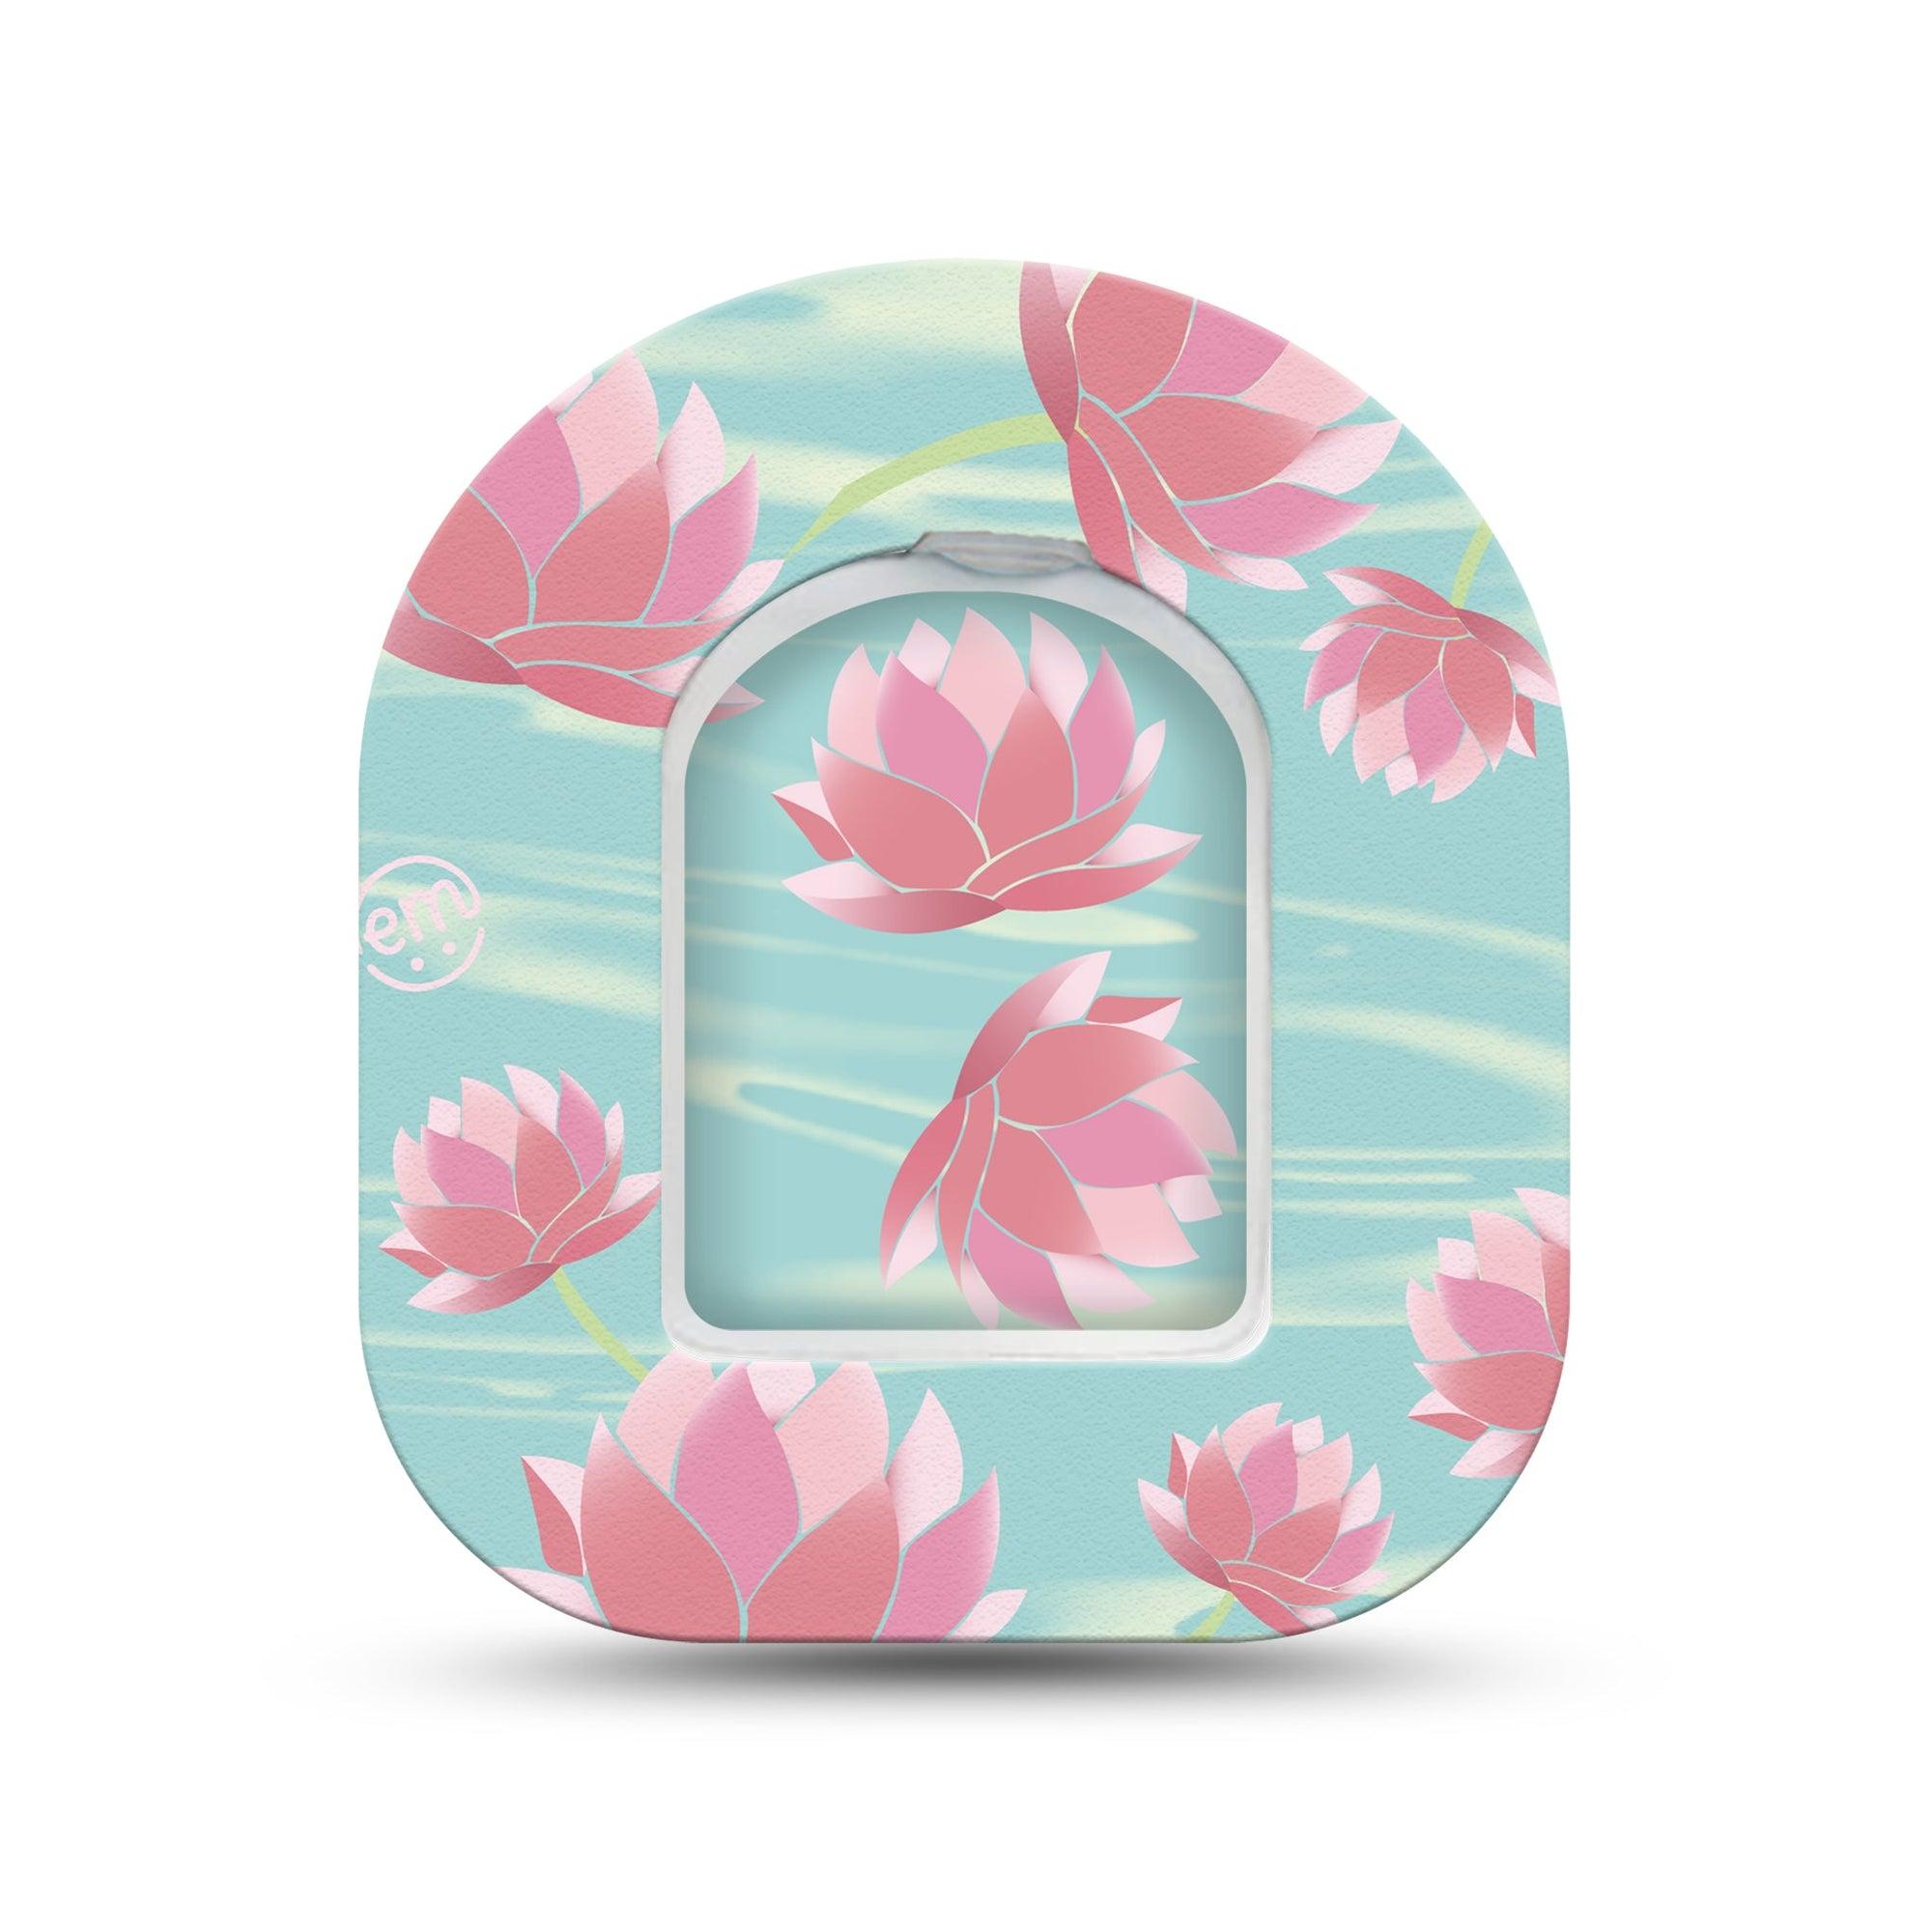 ExpressionMed Meditation Lotus Omnipod Surface Center Sticker and Mini Tape Pink Lotus Floating in Water Vinyl Sticker and Tape Design Pump Design